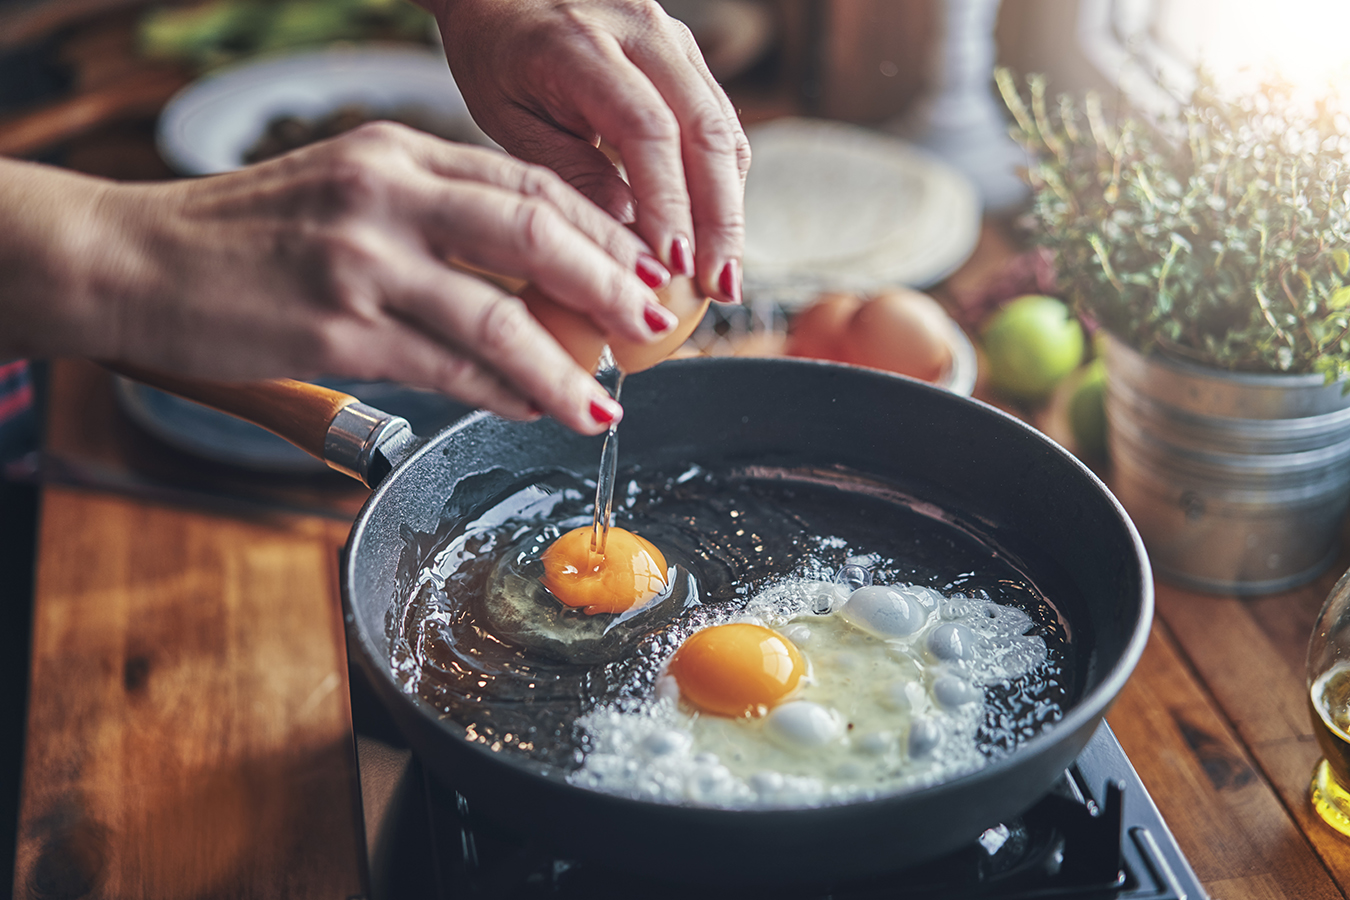 Hands breaking iron-rich eggs into skillet